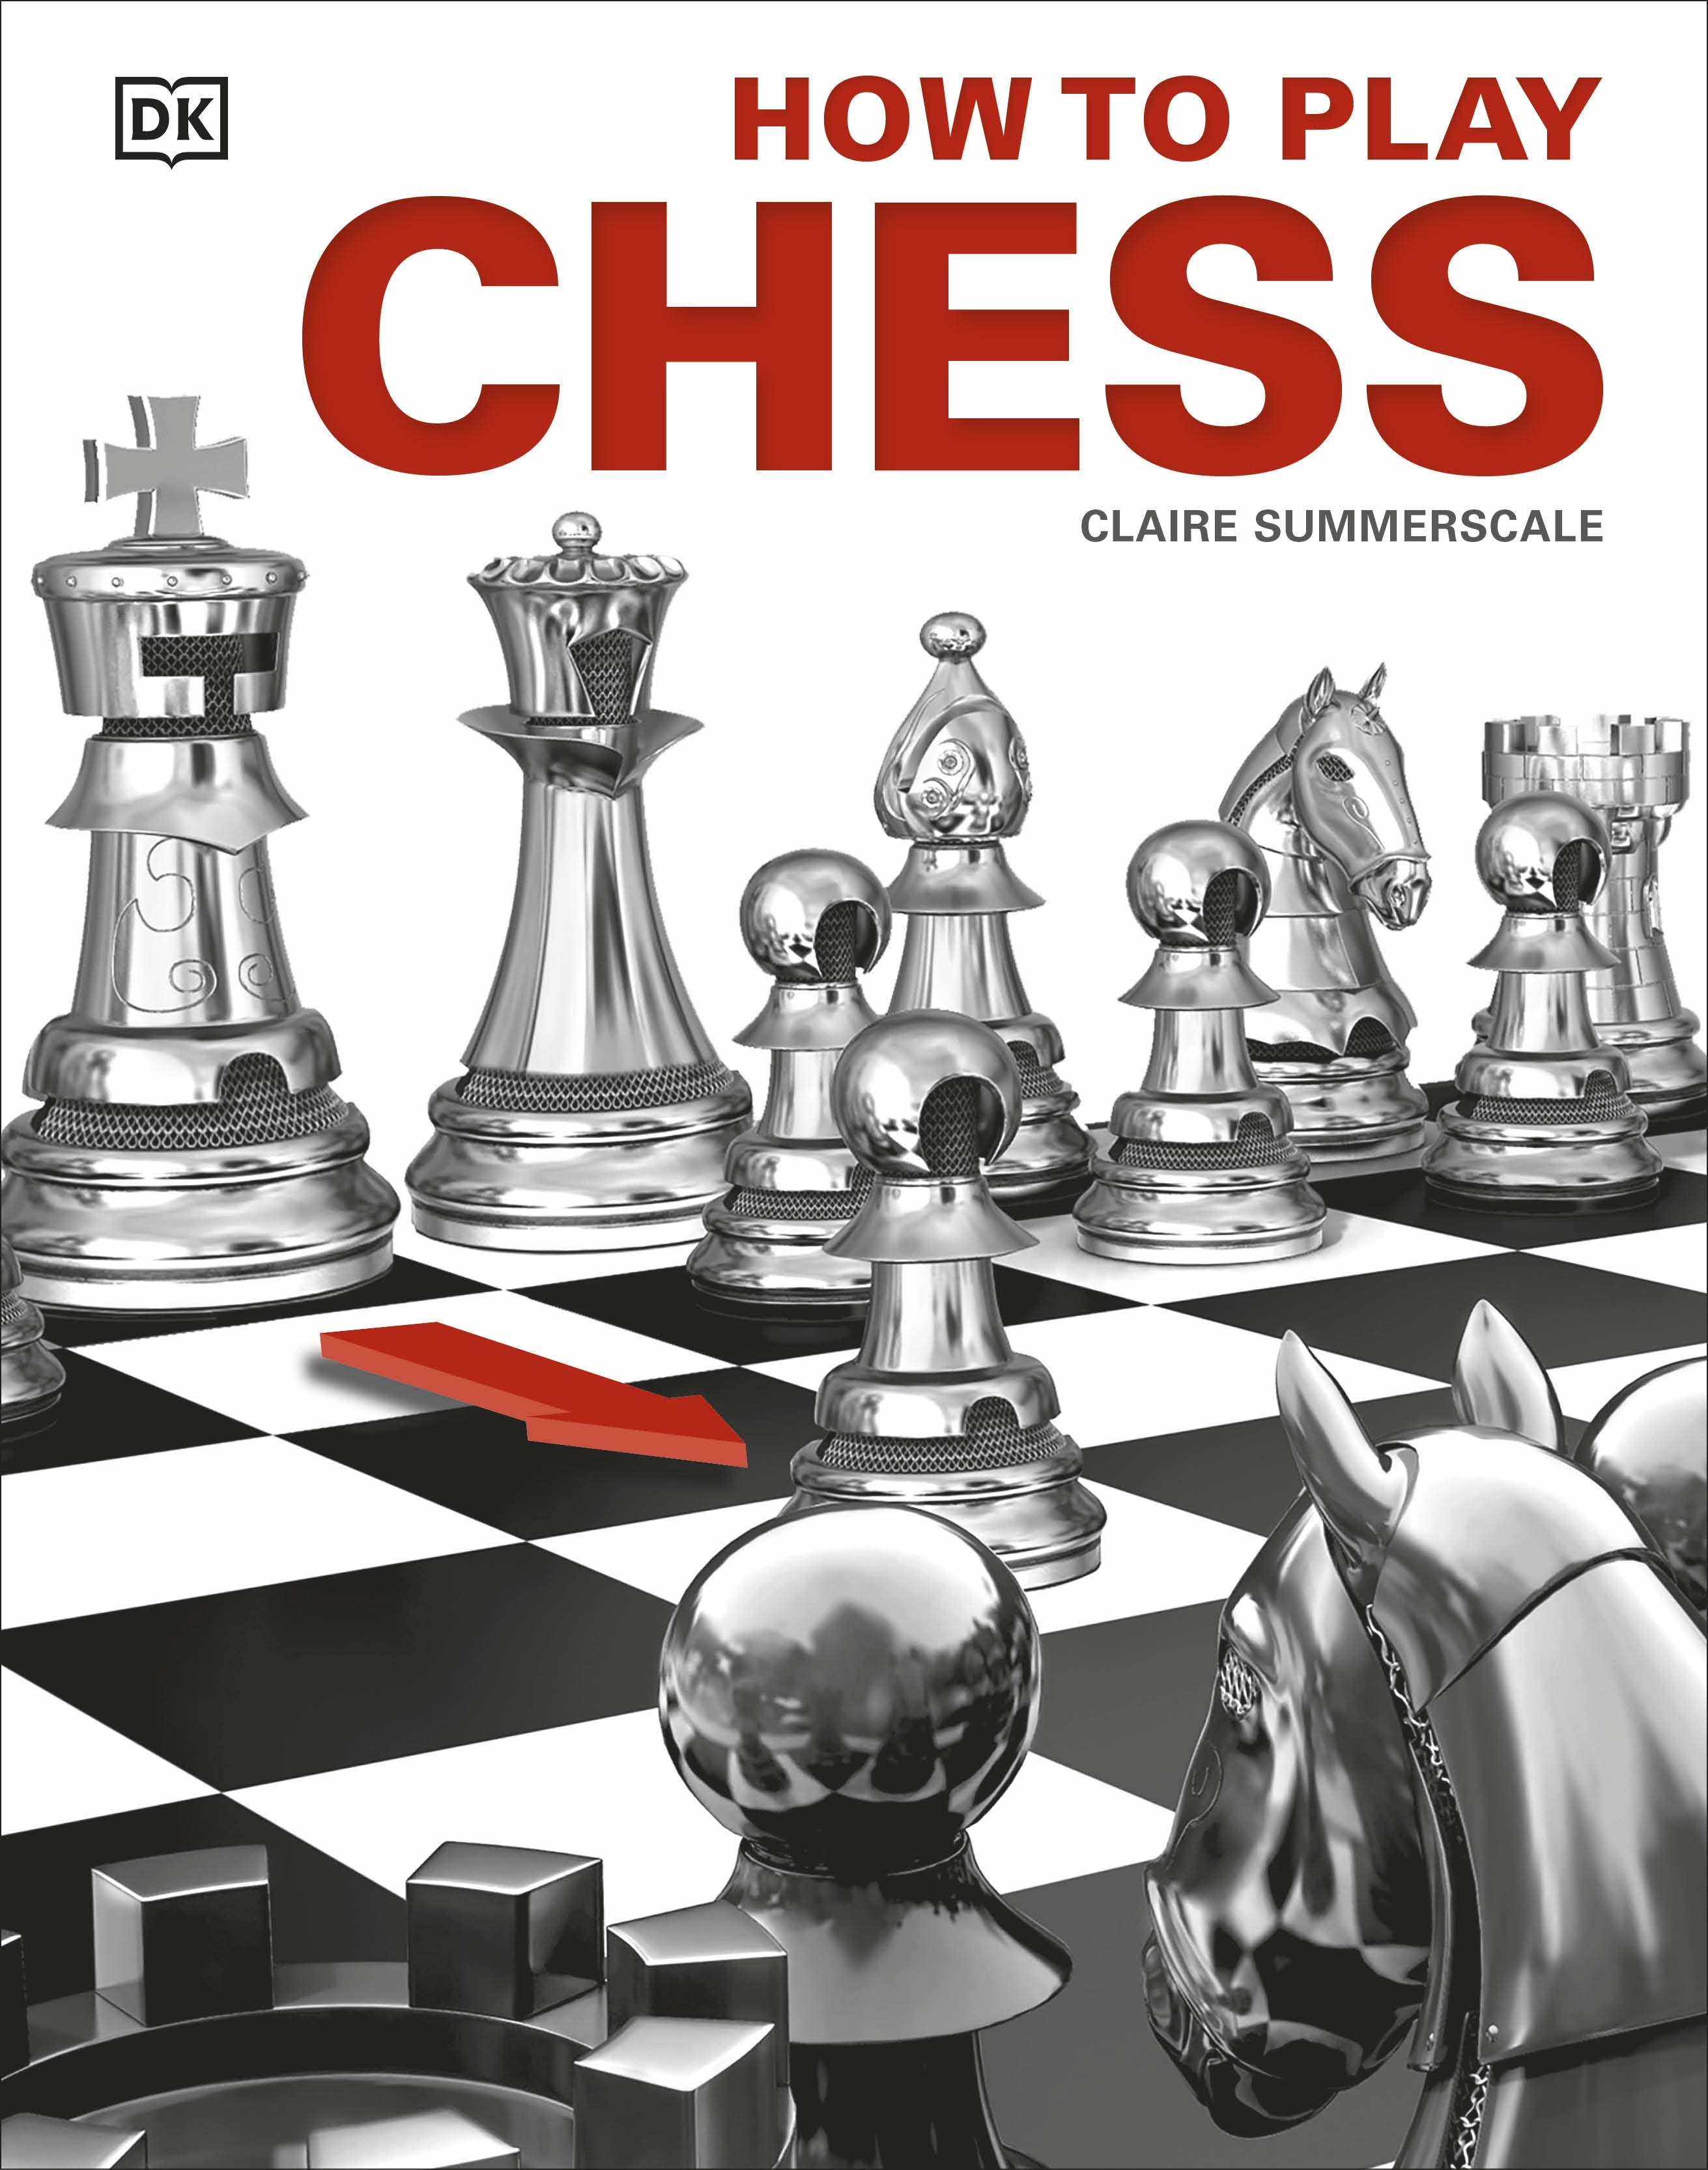 how-to-play-chess-by-claire-summerscale-penguin-books-australia